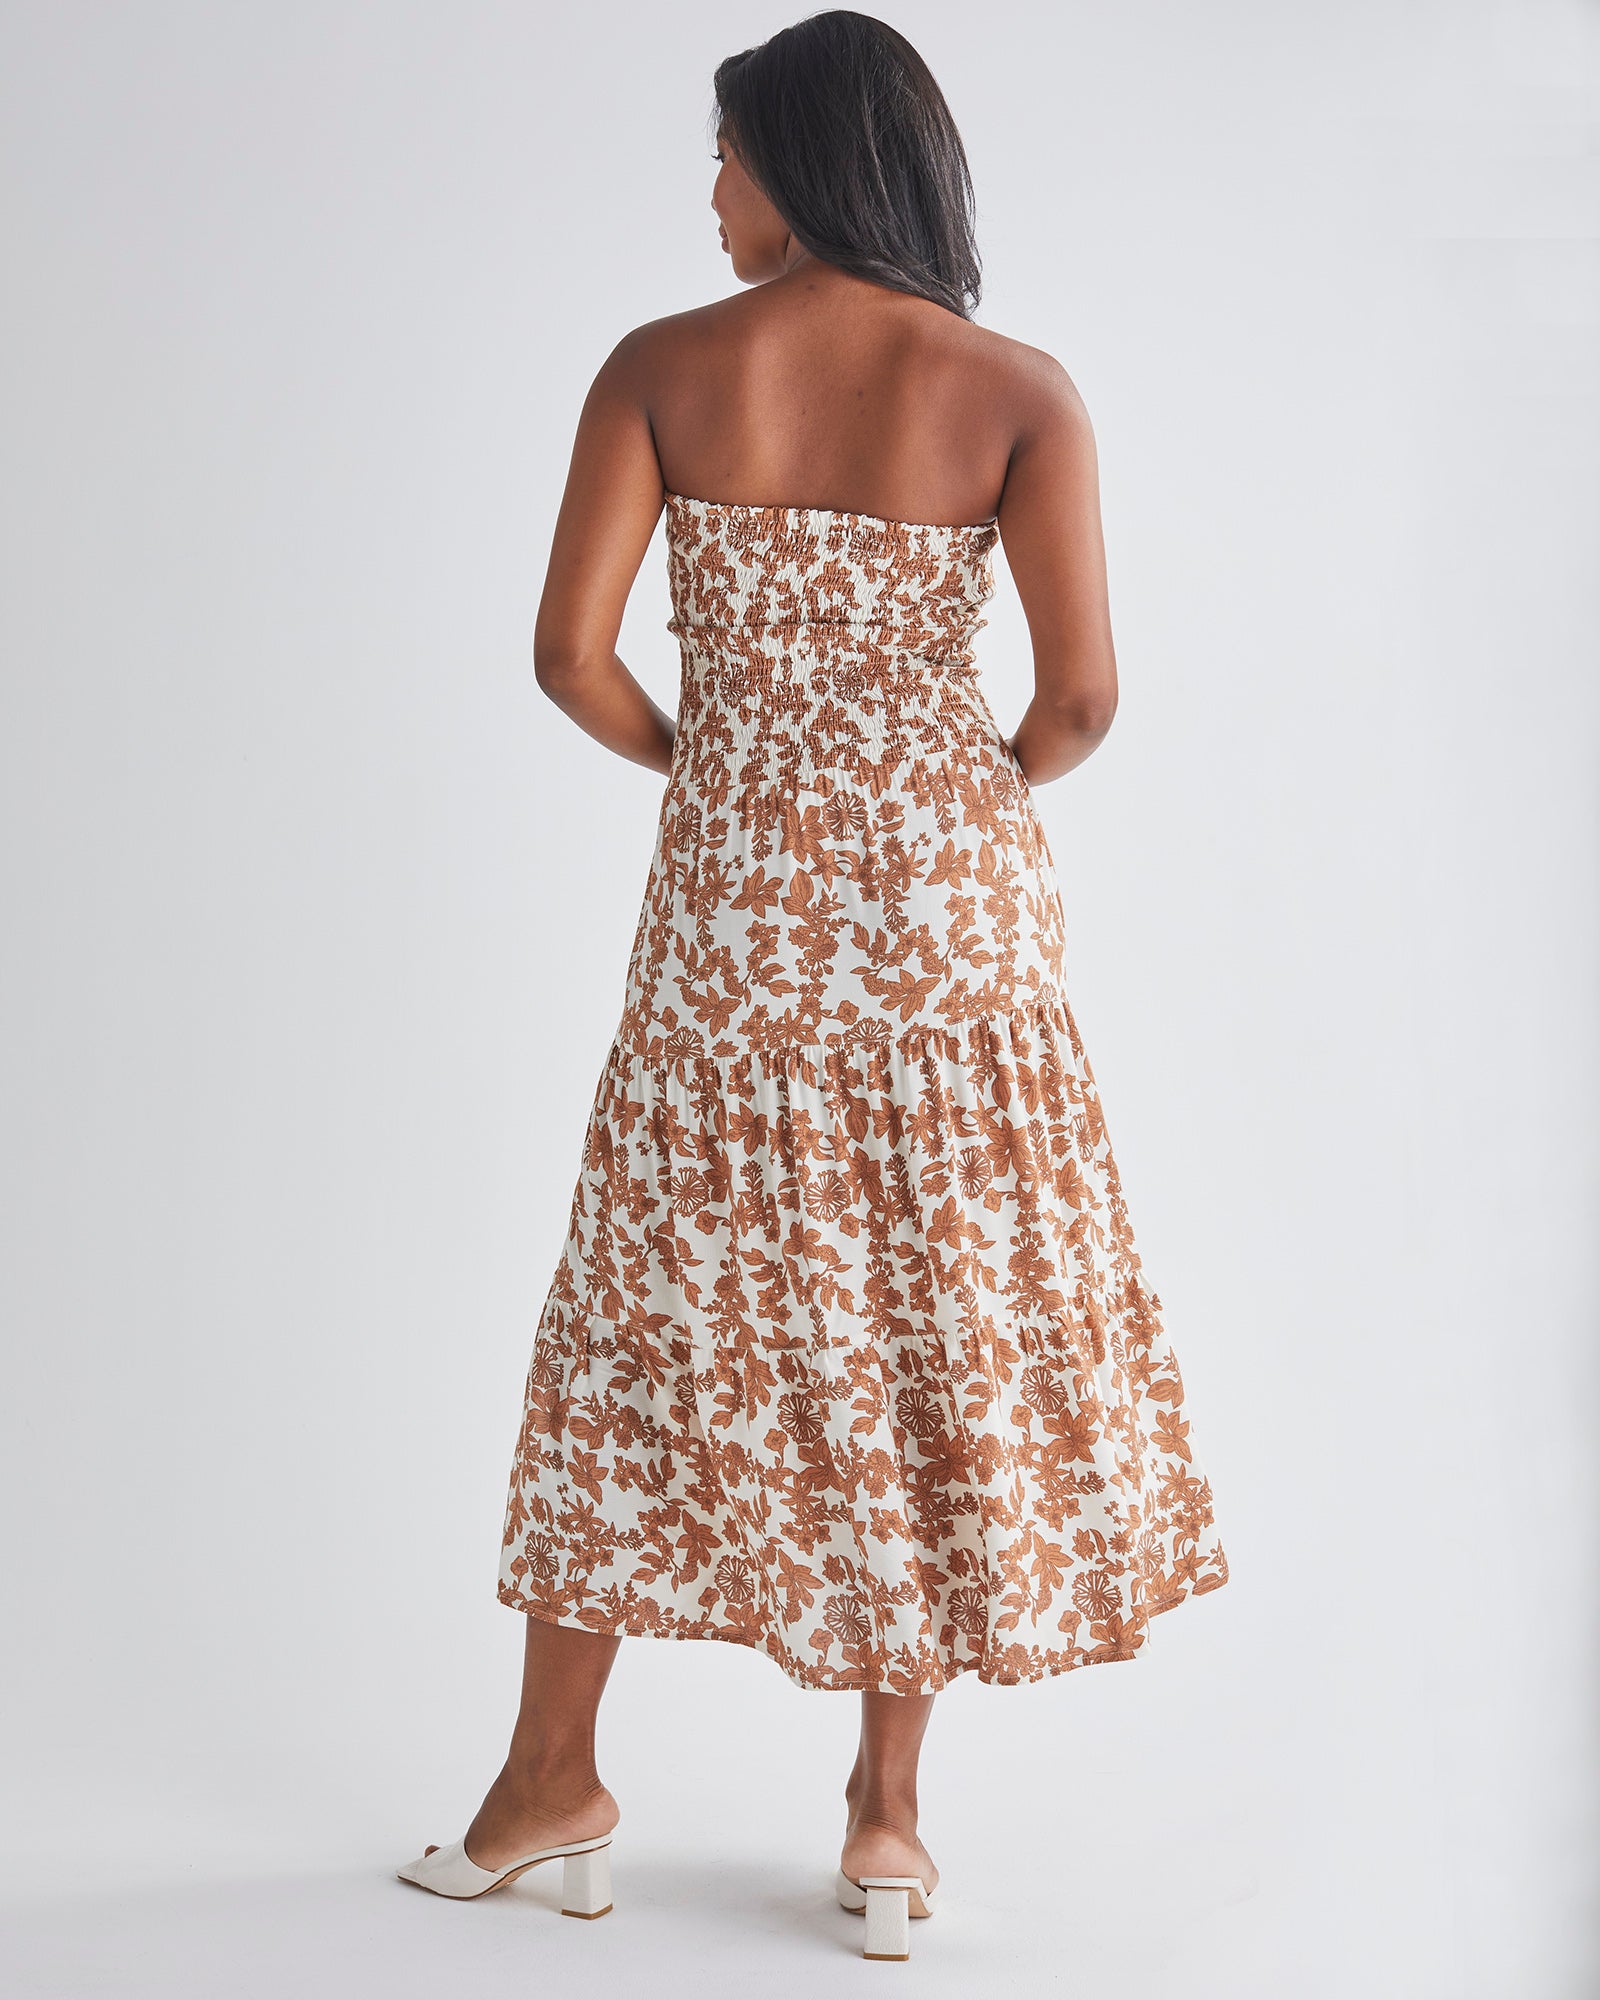 Back View: Long skirt Strapless dress Shirred elastic waist band. Colour: Brown Floral Print from Angel Maternity